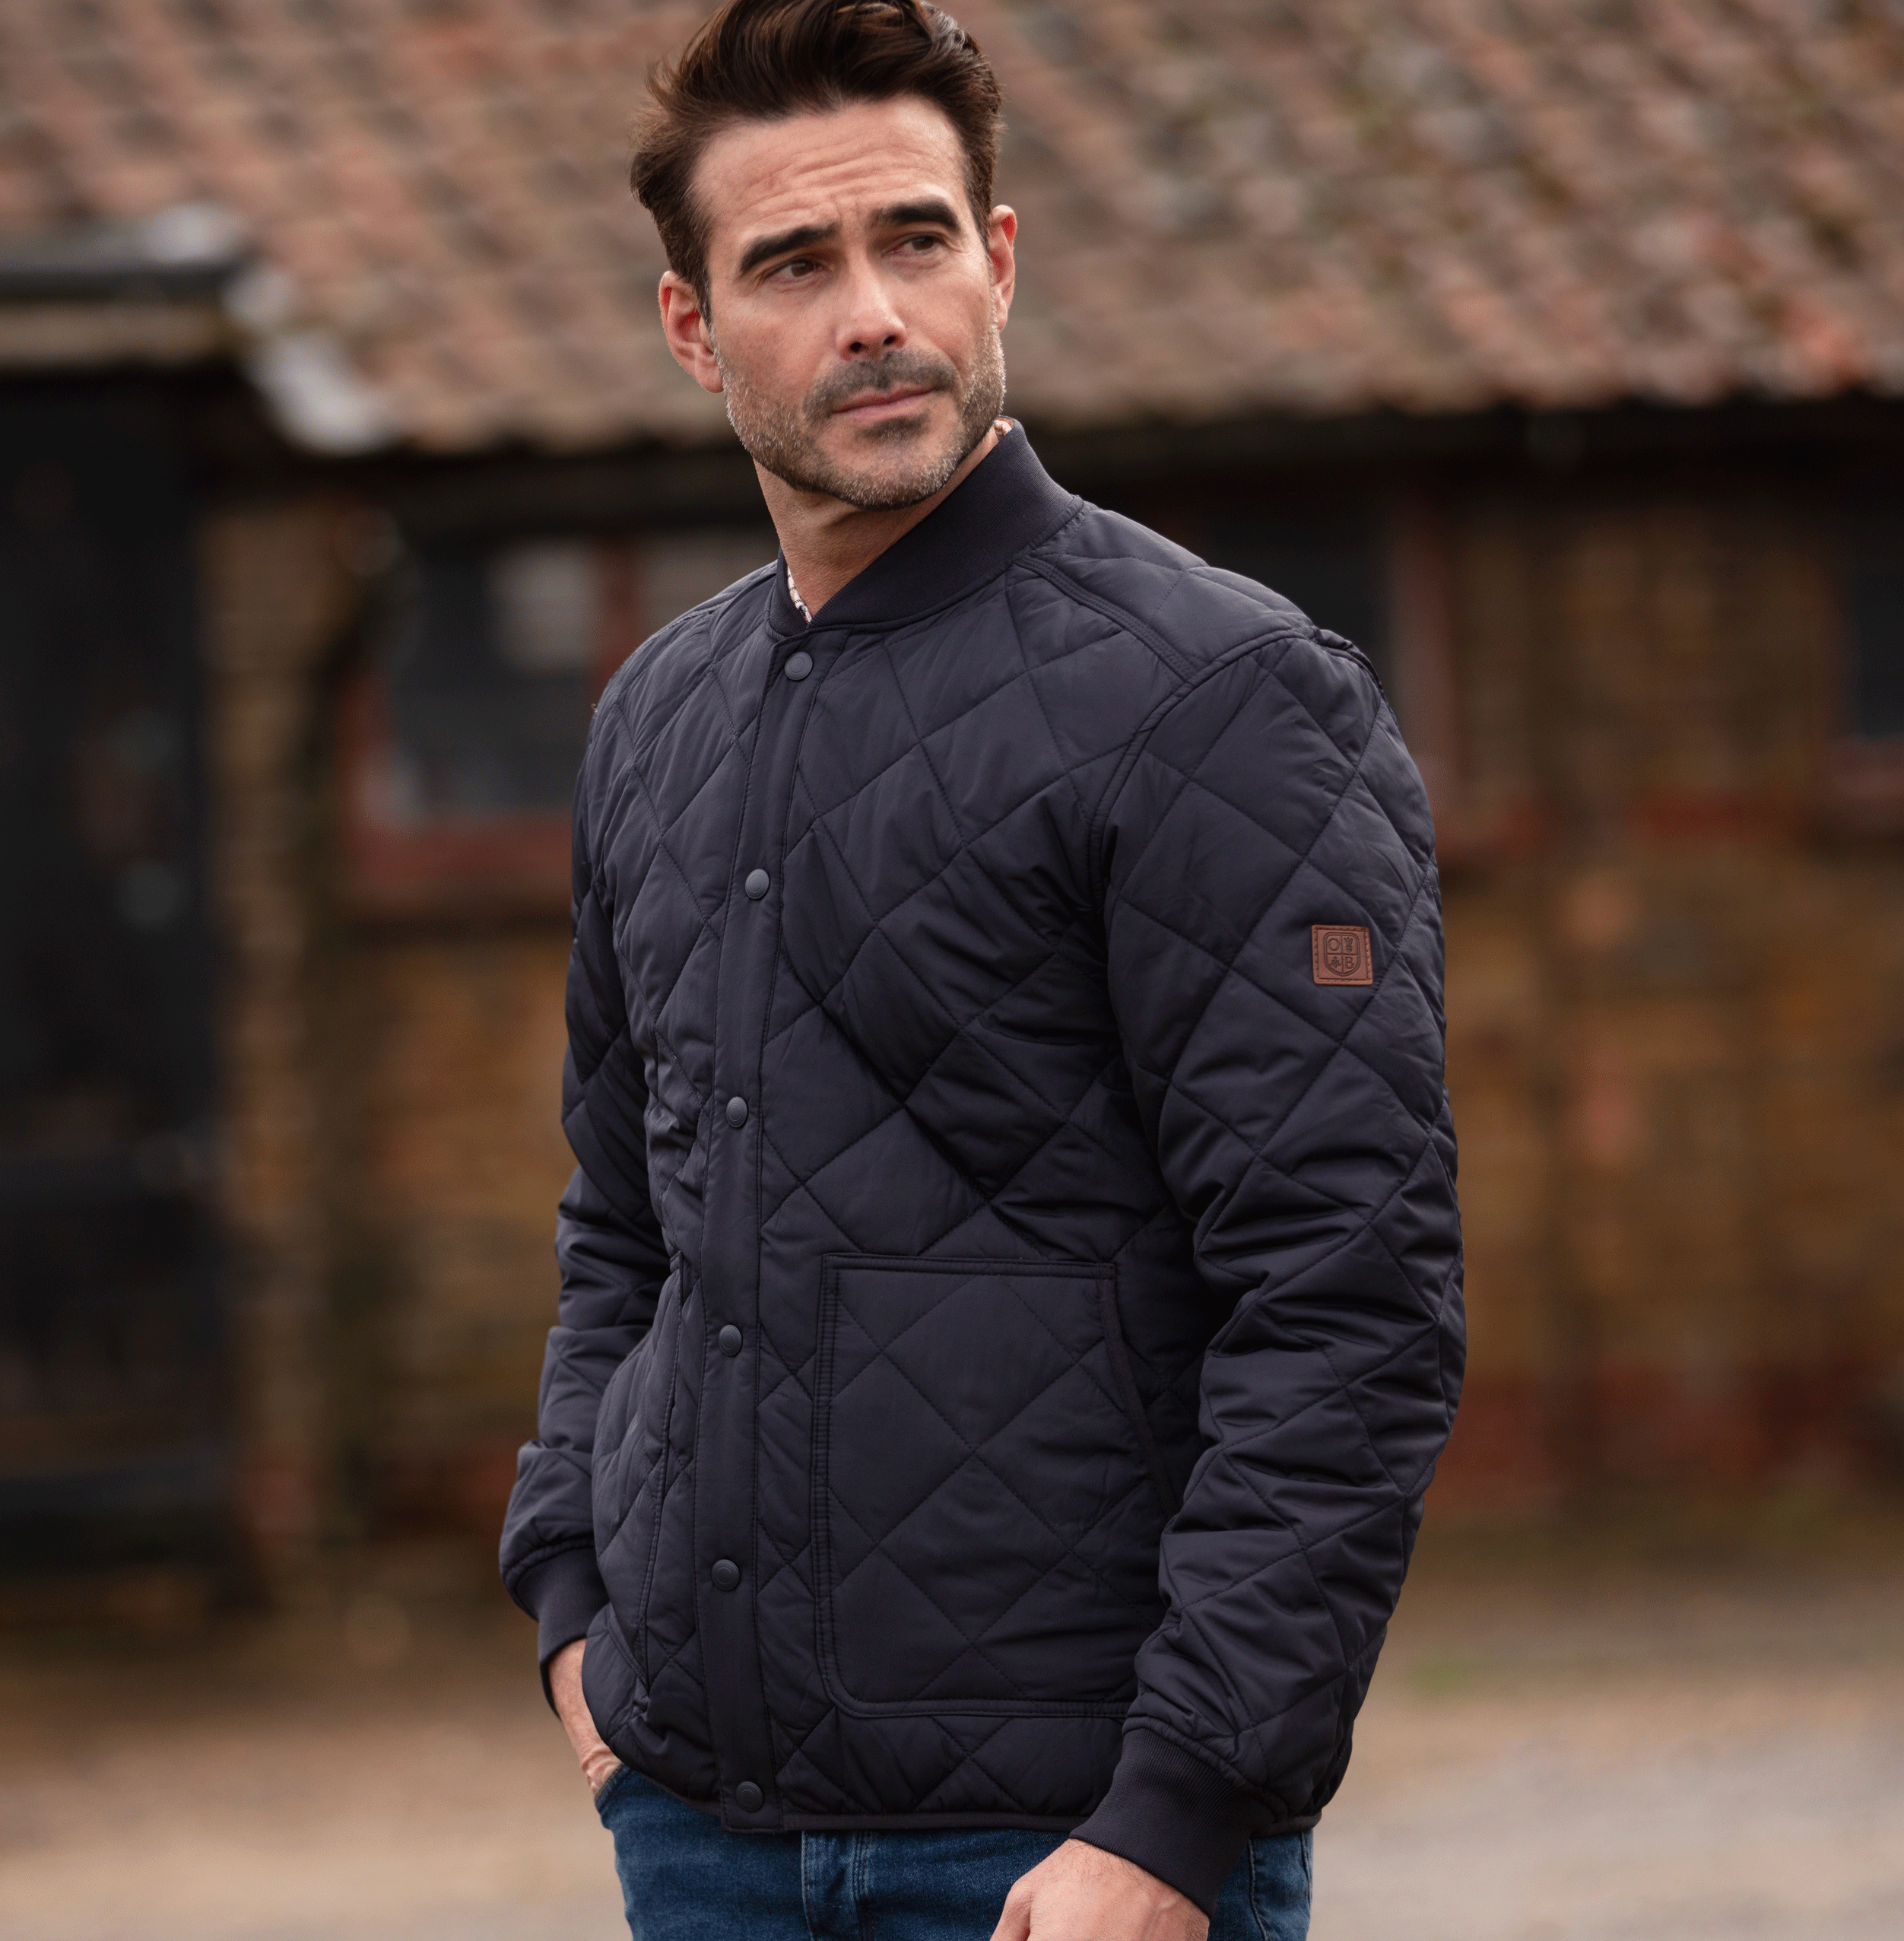 MJ005 - Men's Keswick Quilted Jacket - NAVY